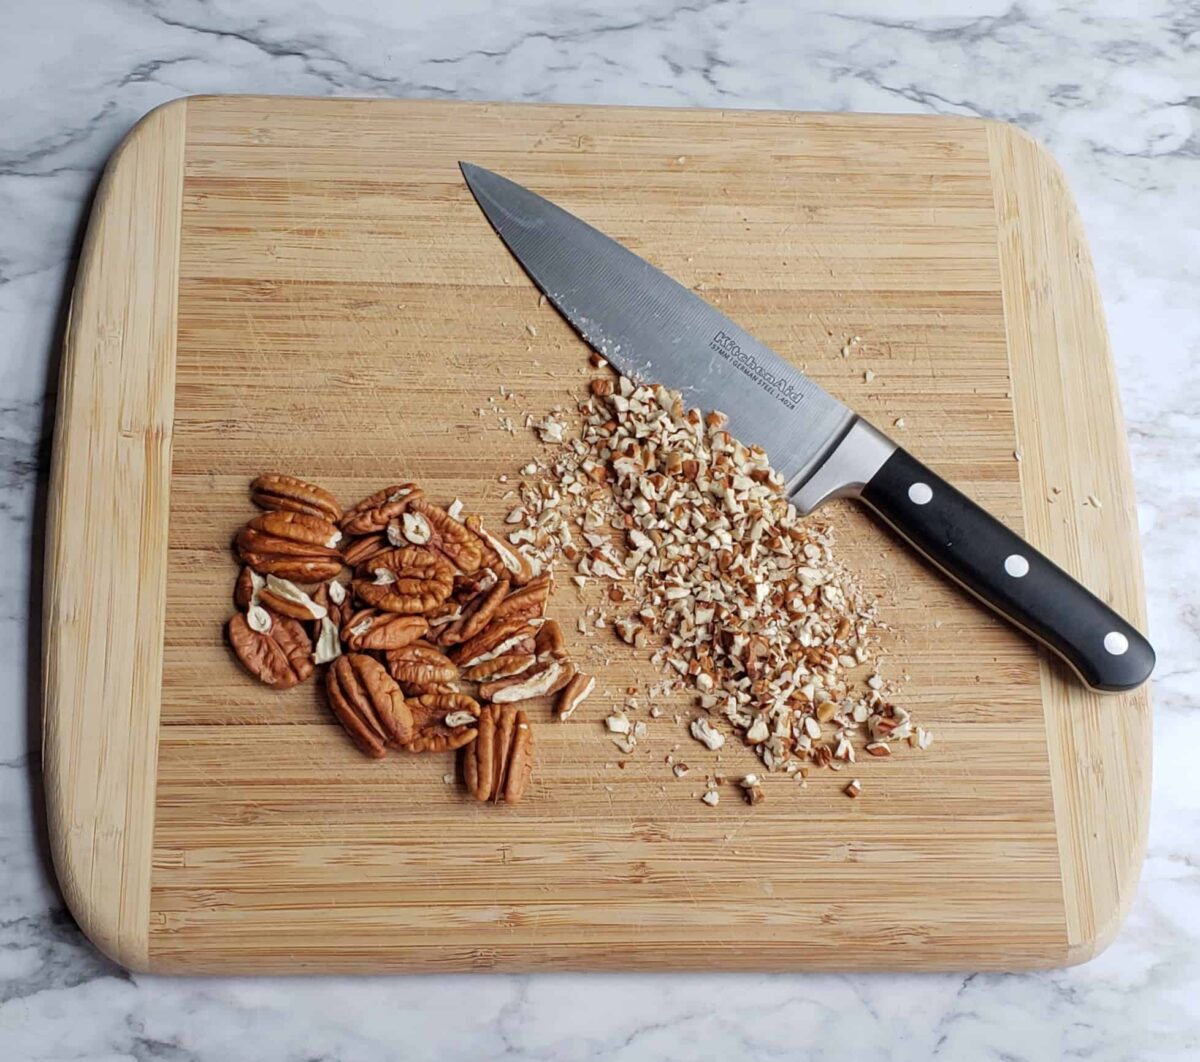 Whole pecans and finely chopped pecans on a wooden cutting board with a chefs knife